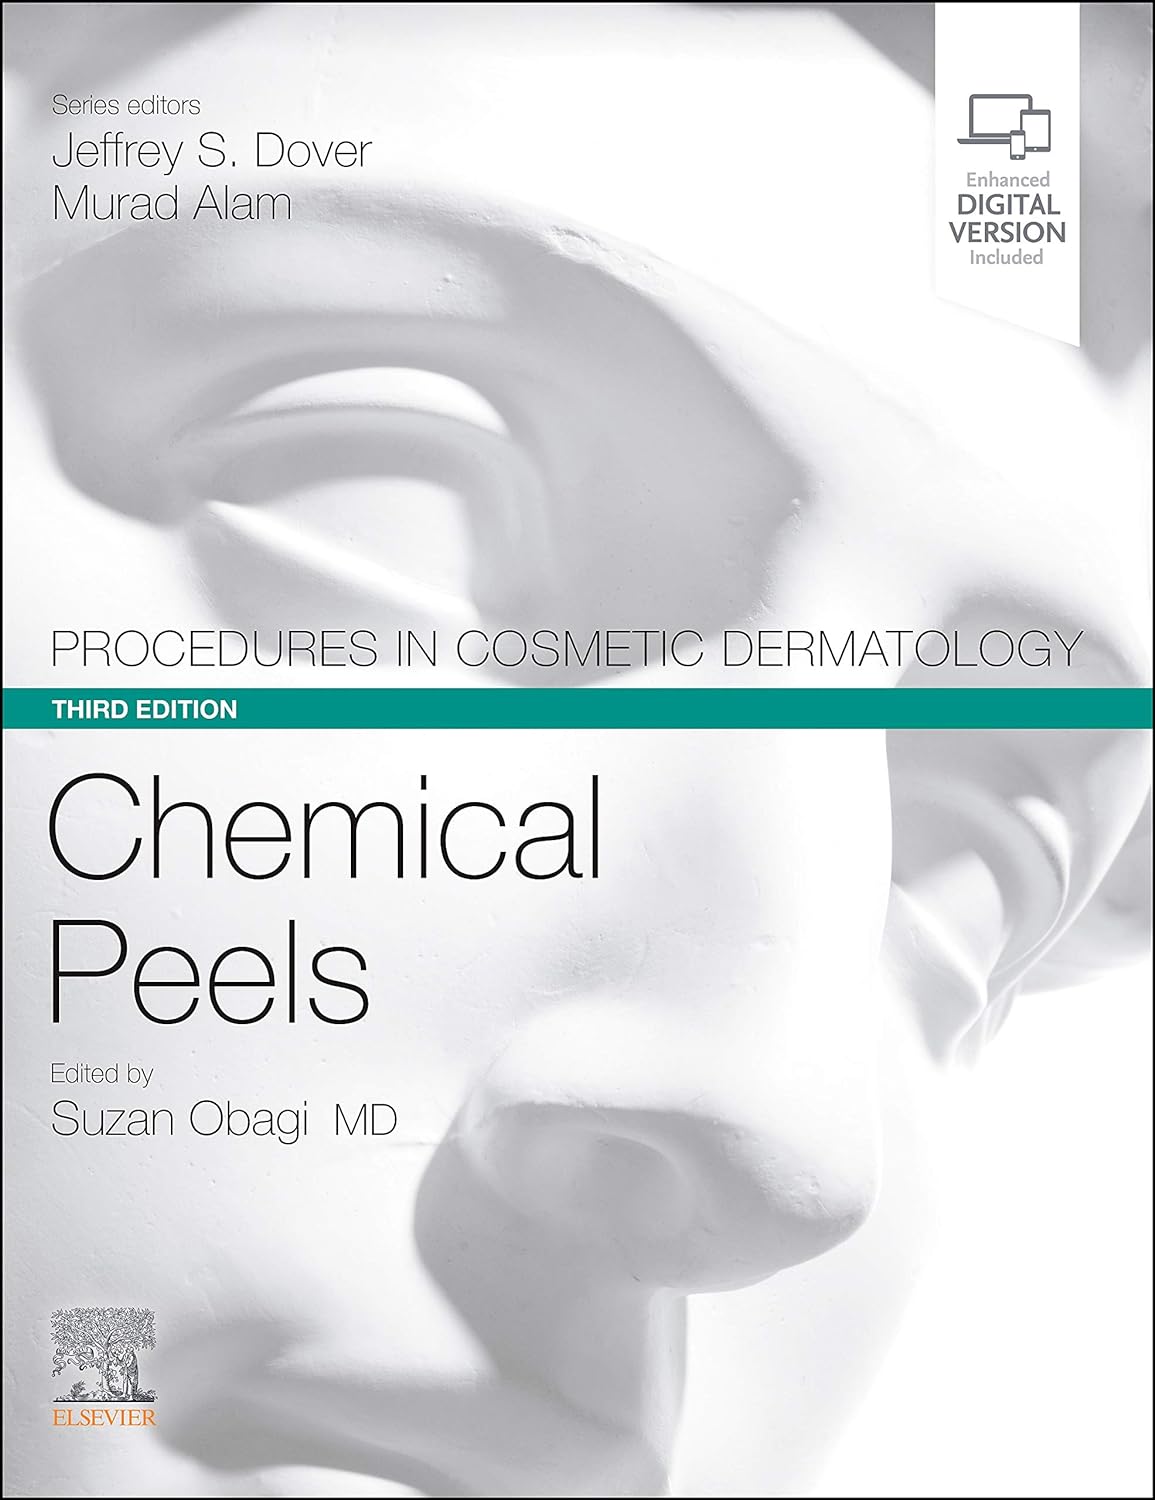 Procedures in Cosmetic Dermatology Series: Chemical Peels 3rd Edition